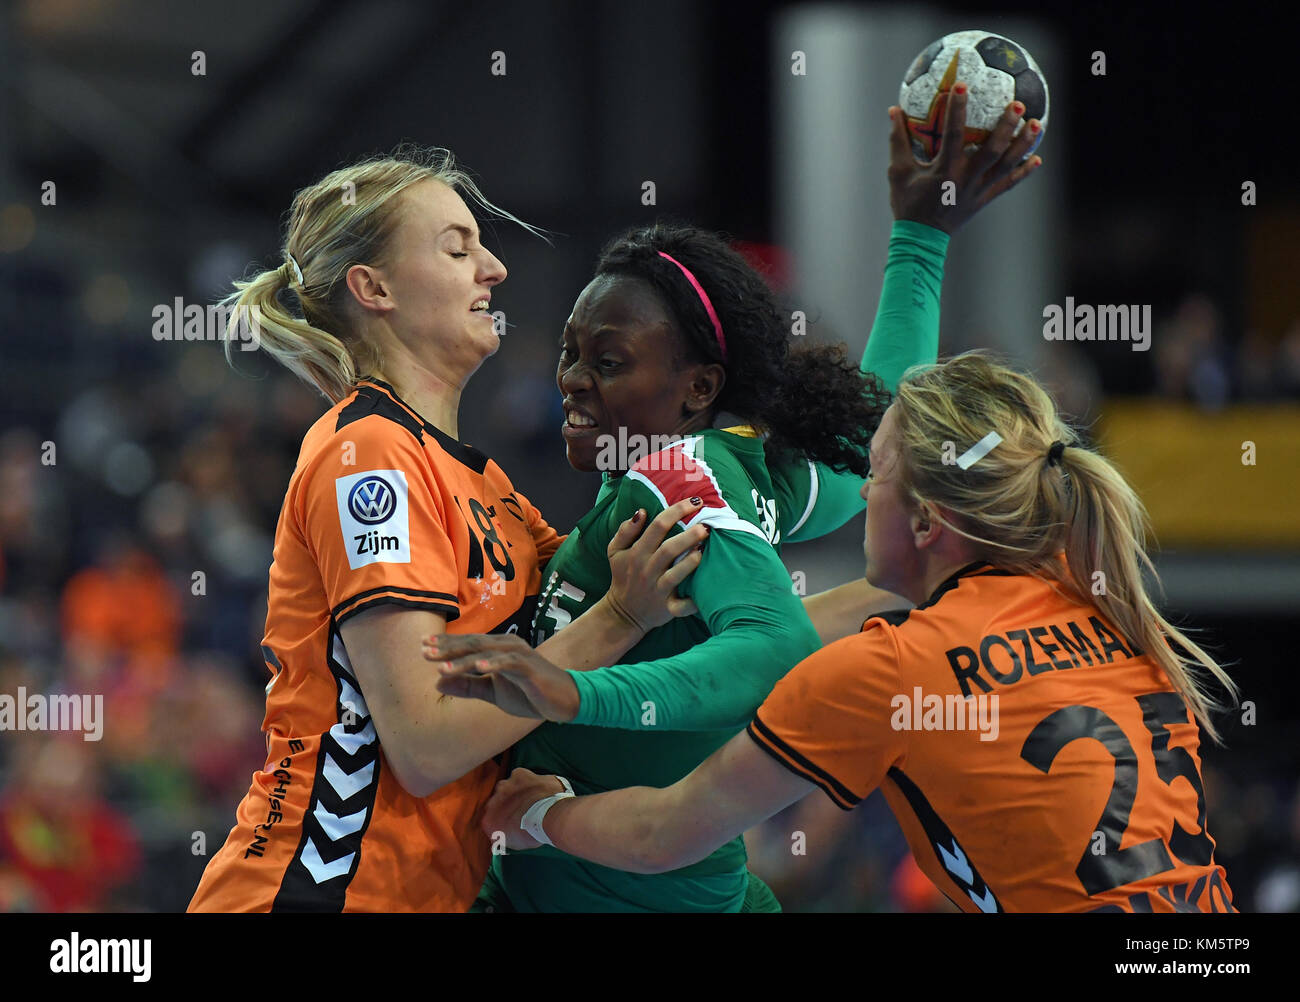 Leipzig, Germany. 05th Dec, 2017. Cameroon's Sumin Choi (C) is blocked by Holland's Kelly Dulfer (L) und Charris Rozemalen during the World Women's Handball Championship match between The Netherlands and Cameroon in the Leipzig Arena in Leipzig, Germany, 05 December 2017. Credit: Hendrik Schmidt/dpa-Zentralbild/dpa/Alamy Live News Stock Photo